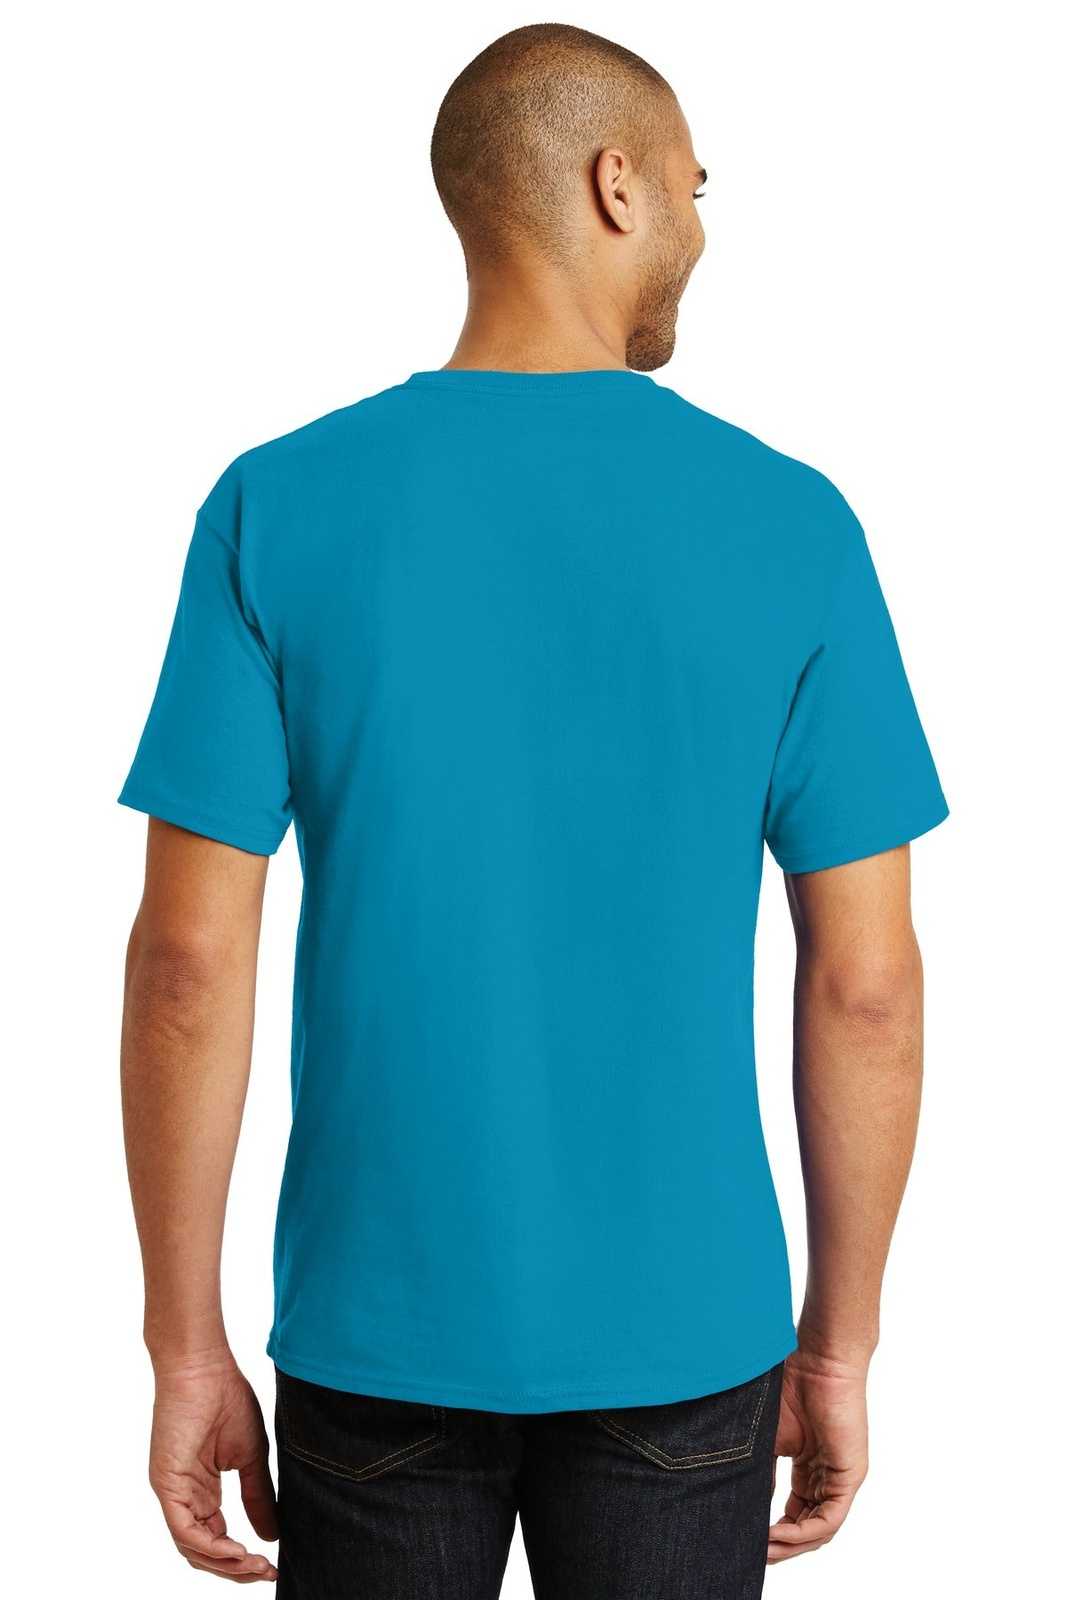 Hanes 5250 Tagless 100% Cotton T-Shirt - Teal - HIT a Double